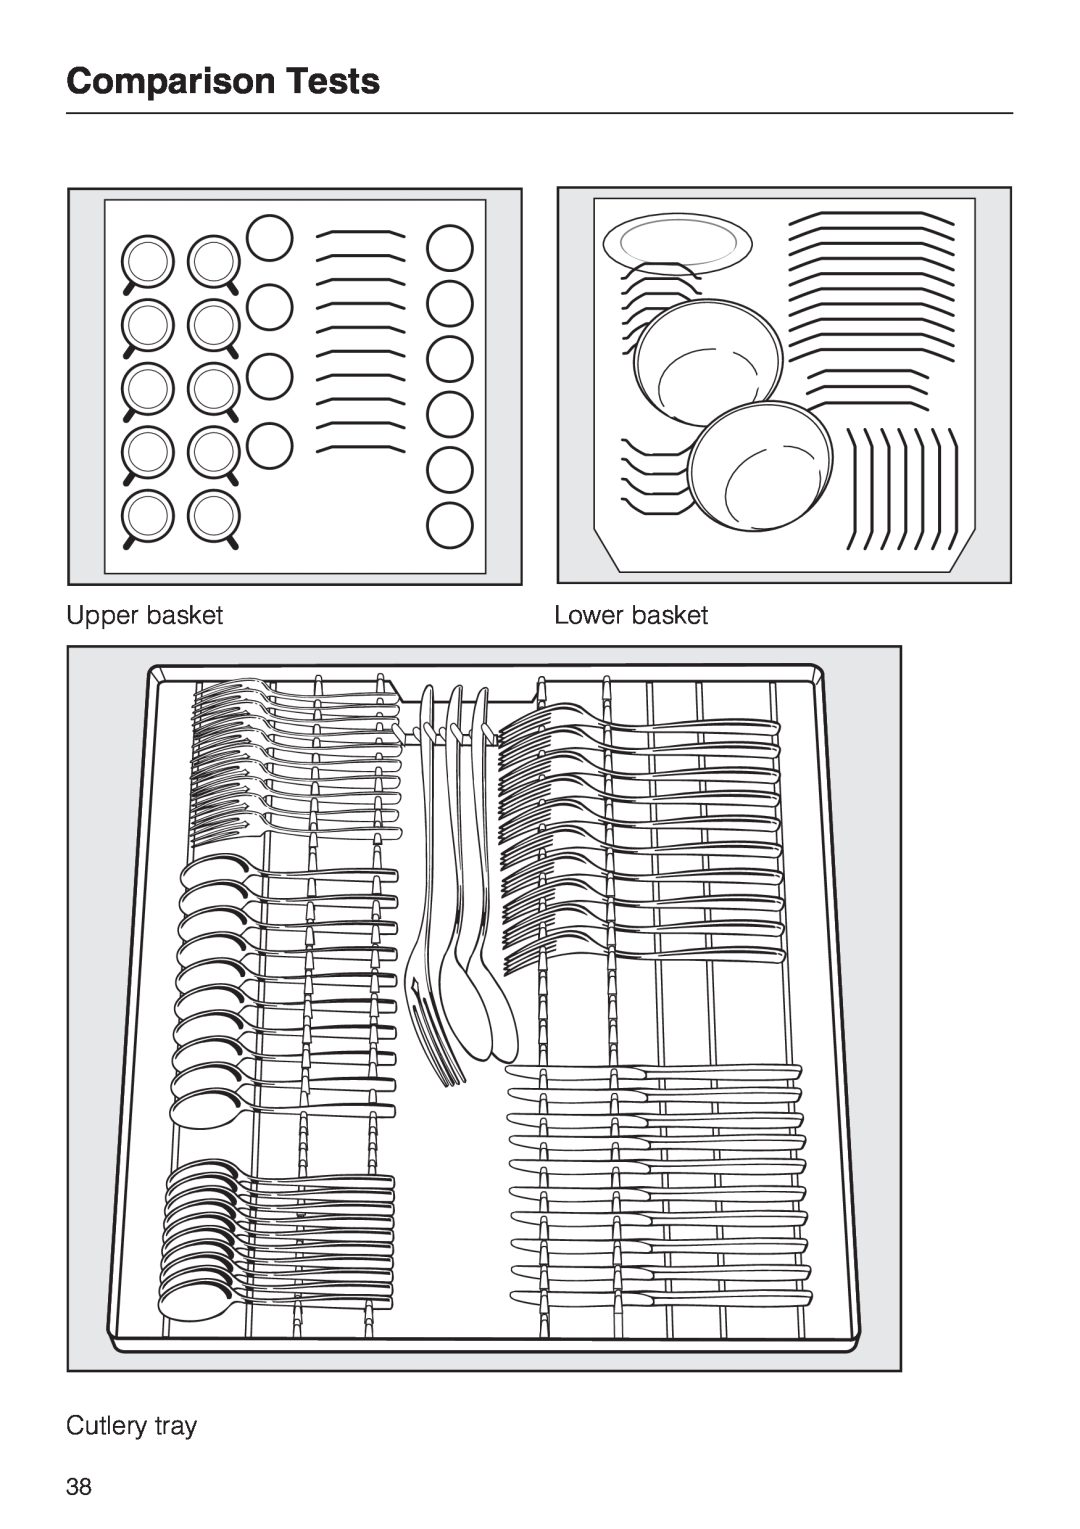 Miele G2142 operating instructions Comparison Tests, Upper basket, Lower basket, Cutlery tray 